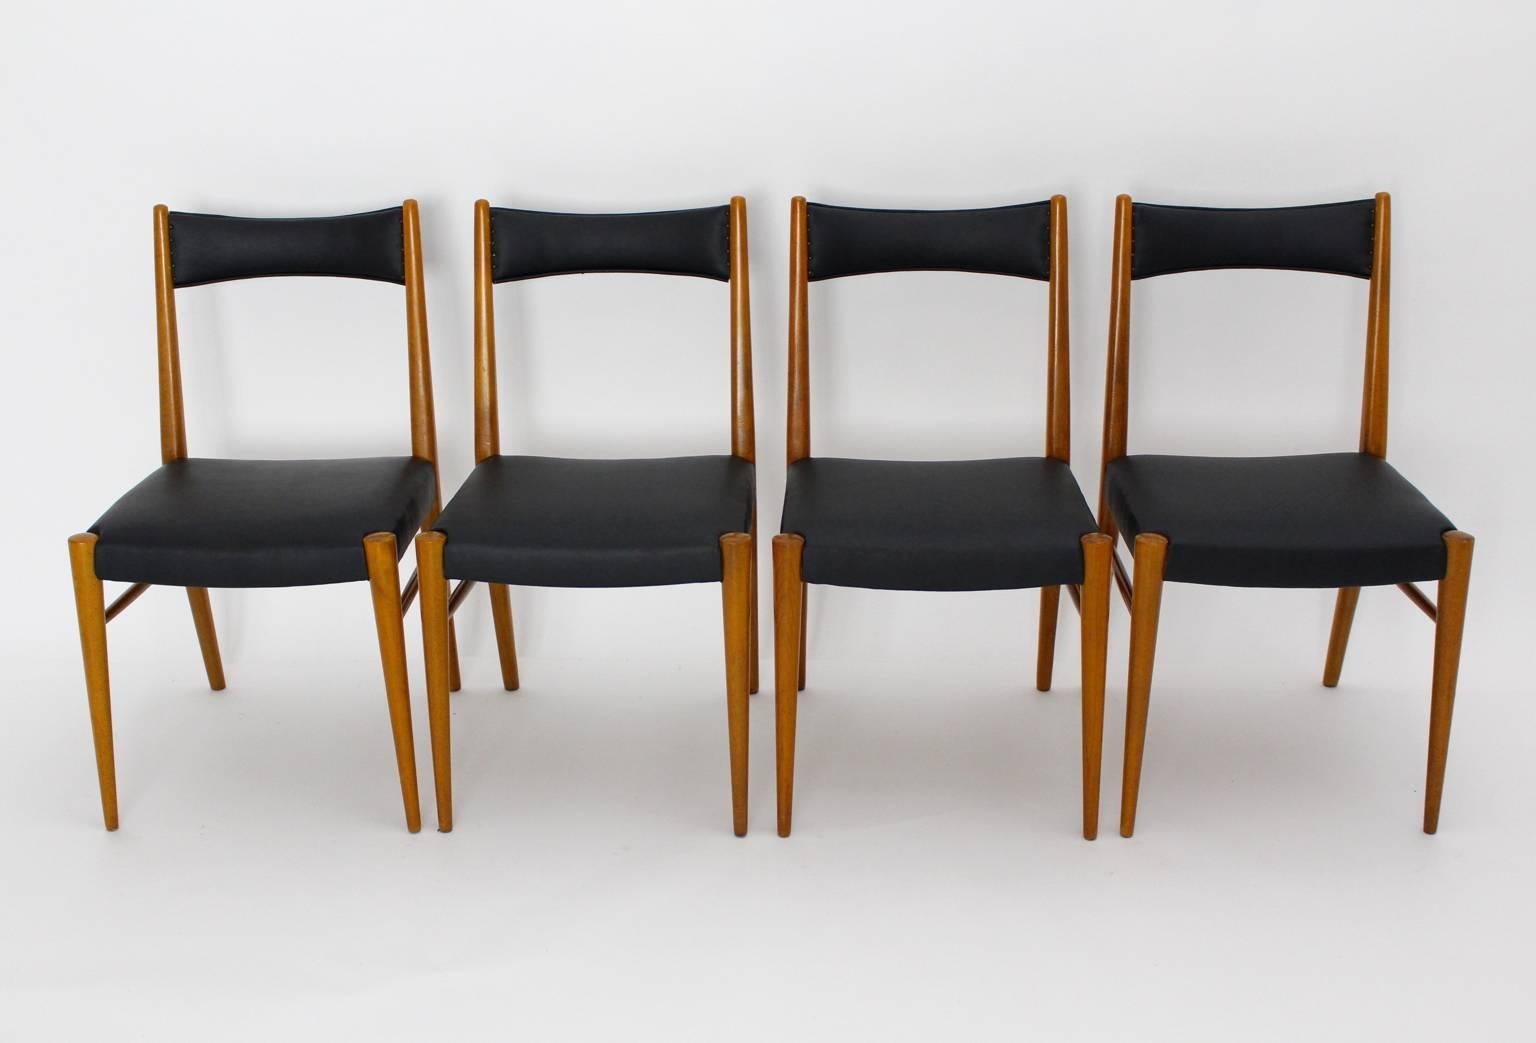 Mid Century Modern set of 4 dining room chairs designed by Anna-Lülja Praun 1953 Vienna.
Anna-Lülja Praun (1906-2004)
The chair frame was made of beechwood, while the seat and back are covered with black faux leather and decor nails.

Measures:
Seat